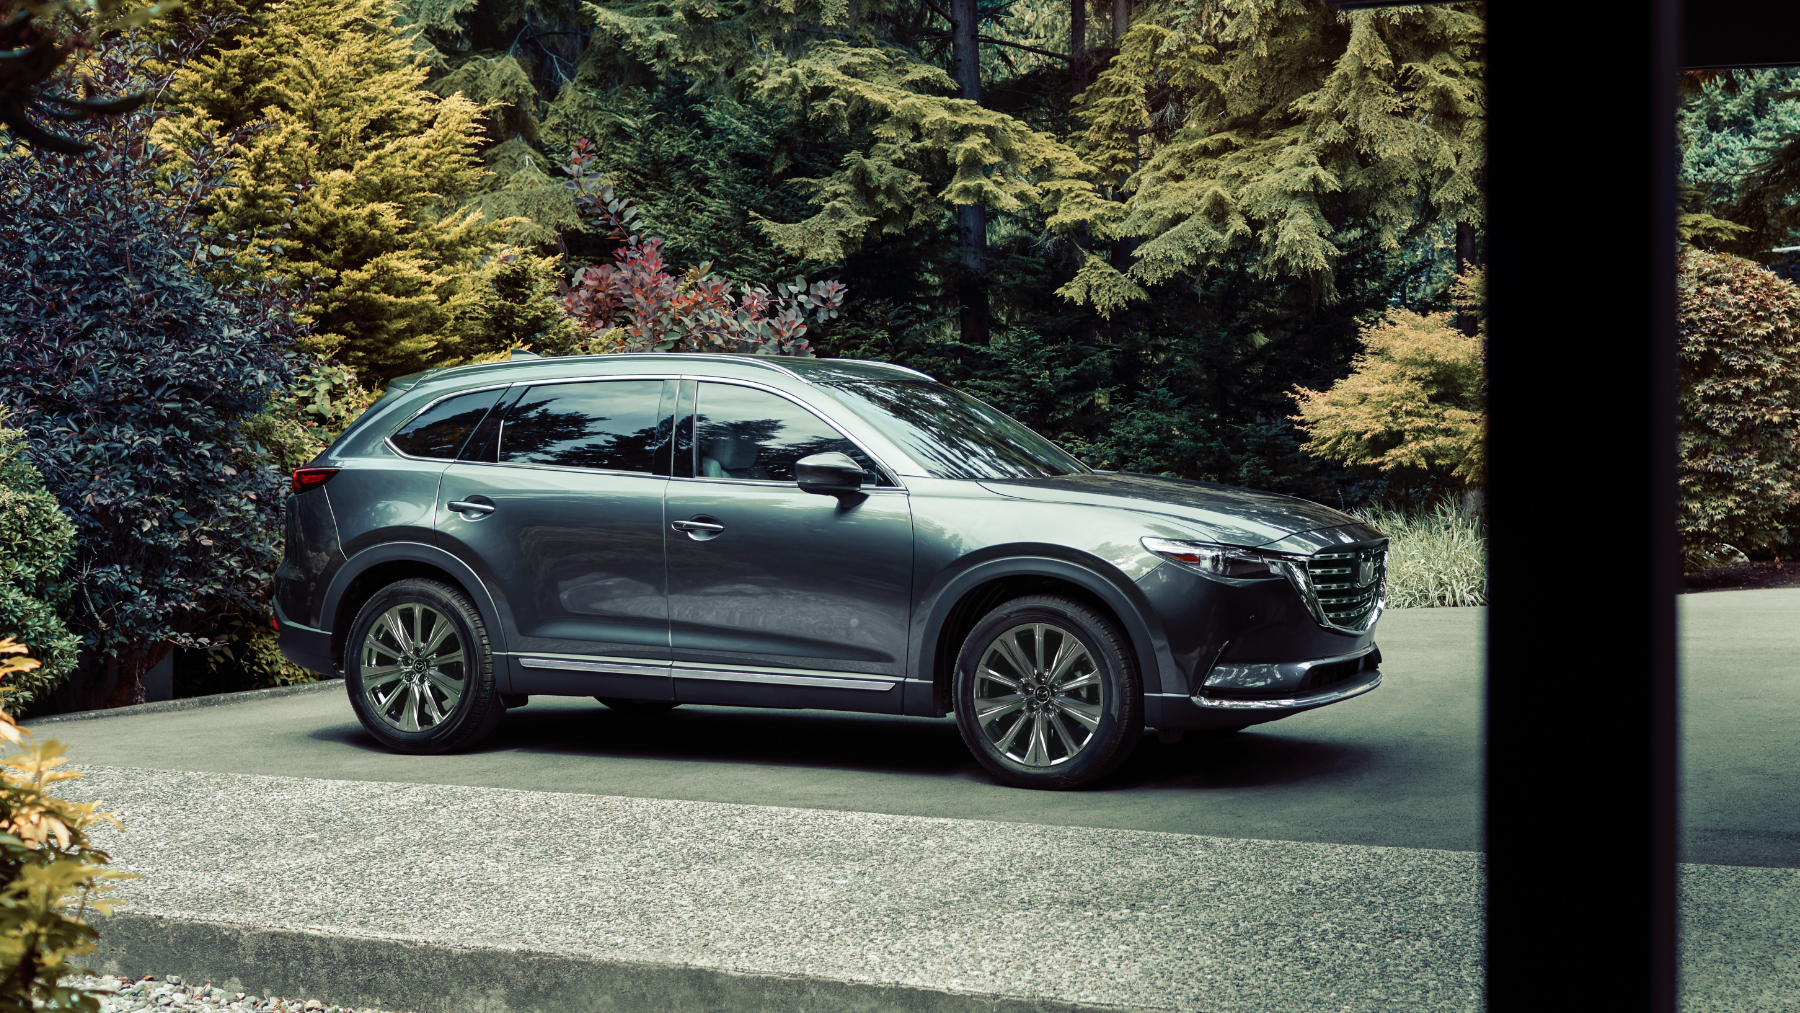 What is the interior of the 2021 Mazda CX-9 like? | Headquarter Mazda